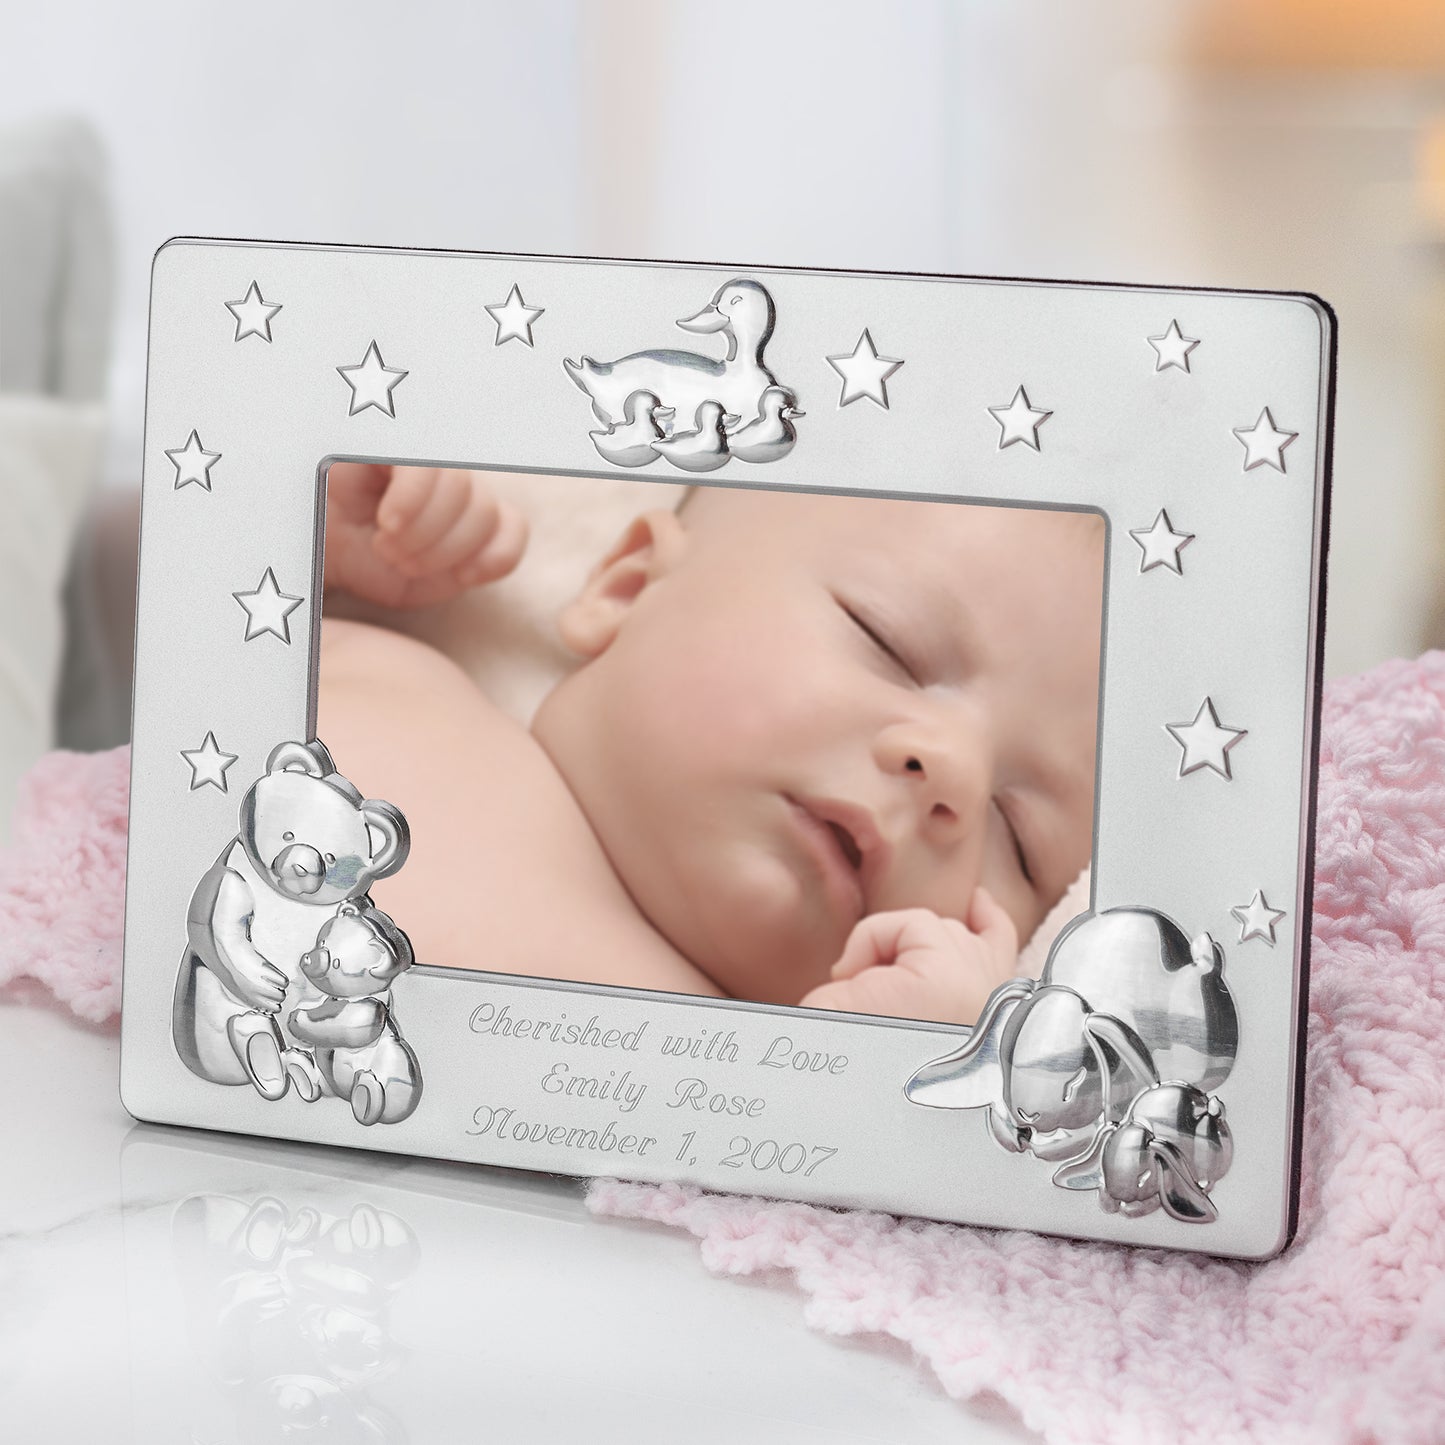 Personalized Steel Baby Picture Frame - Engraved Baby Keepsake Gift